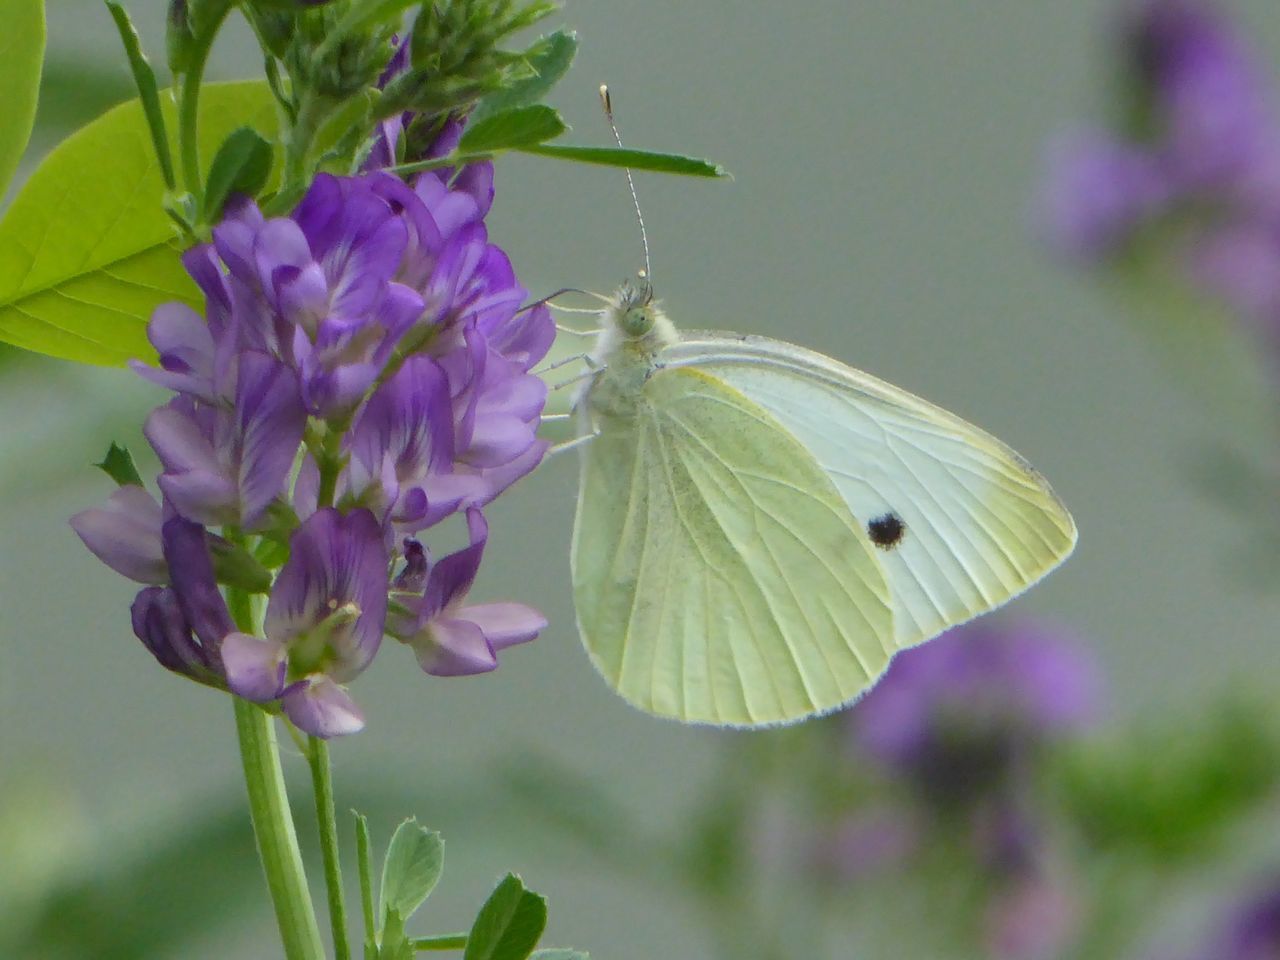 CLOSE-UP OF BUTTERFLY ON PURPLE FLOWERS